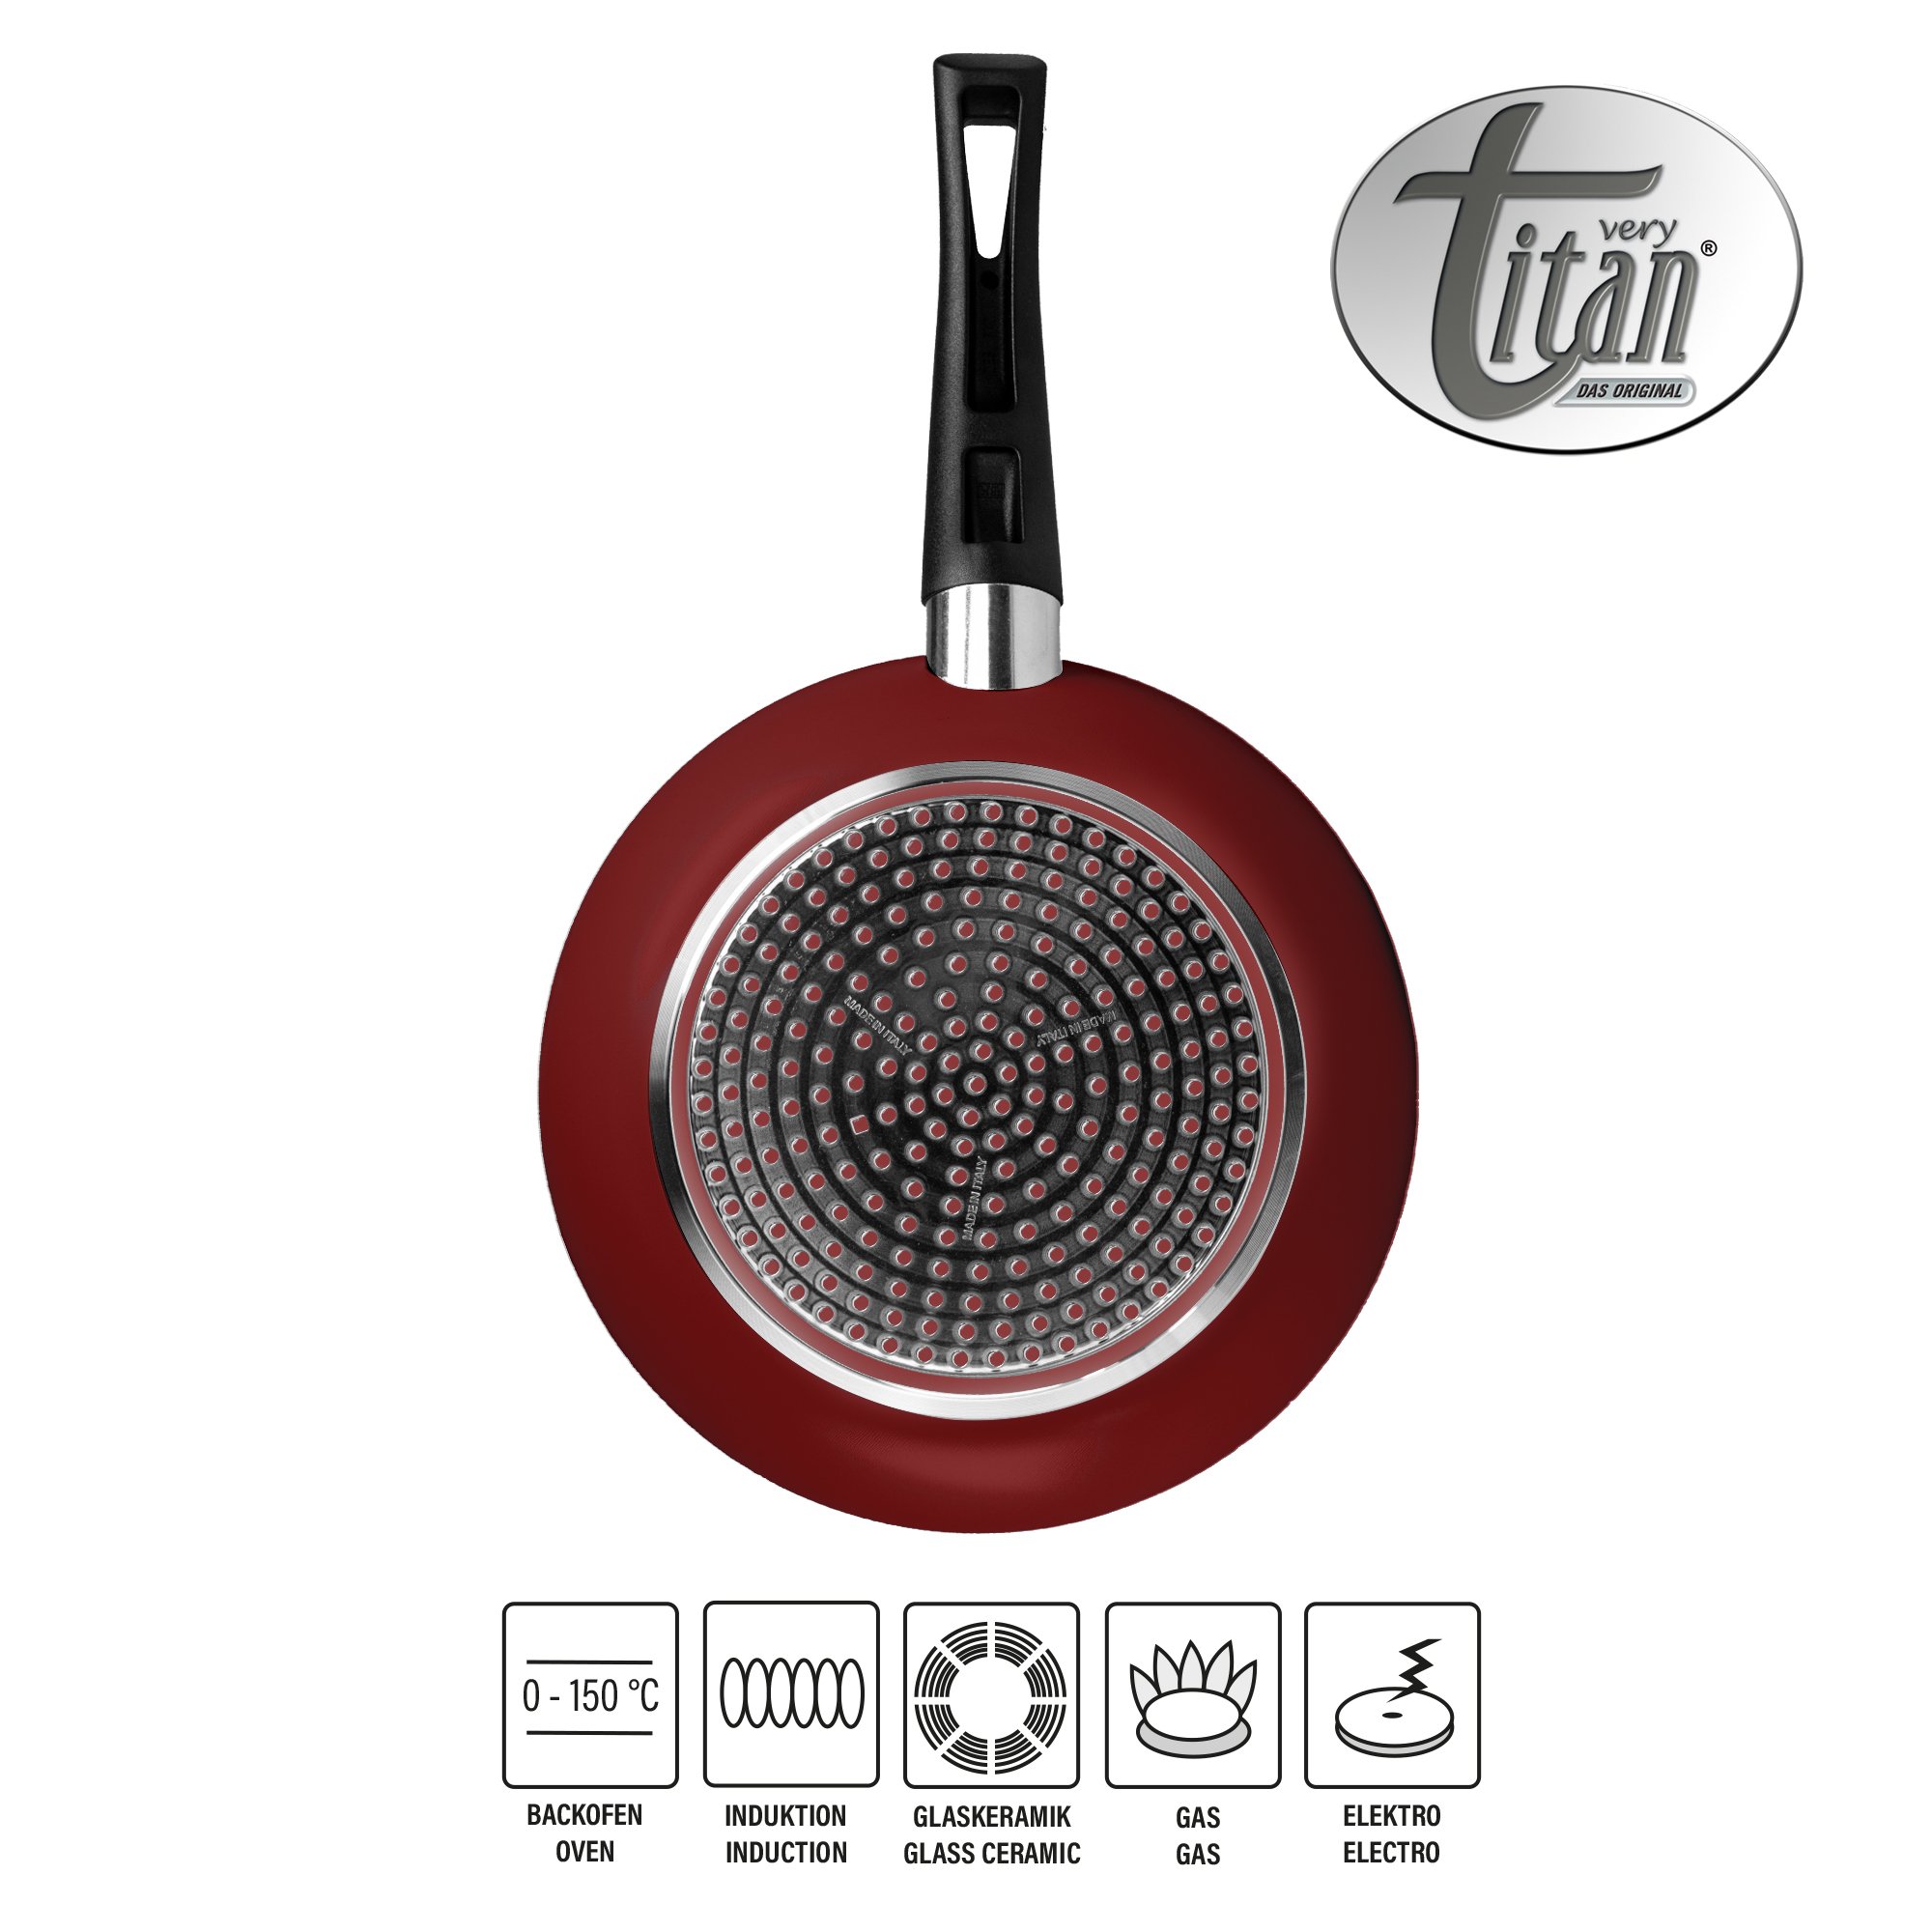 VERY TITAN® frying pan 28 cm, non-stick coated pan, induction and oven-safe, red